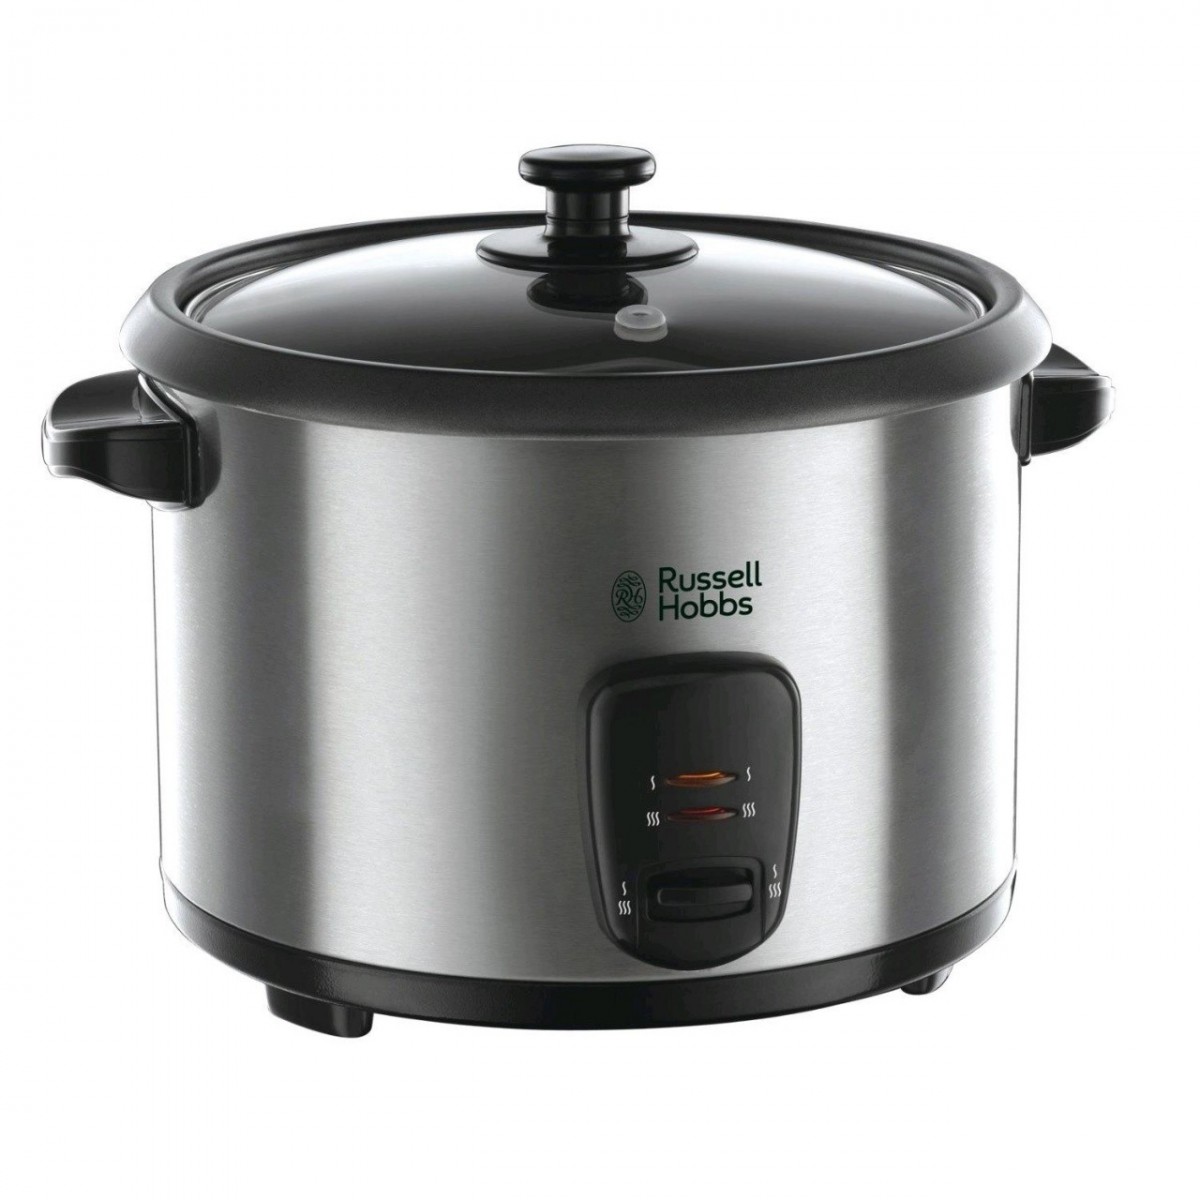 Russell Hobbs 19750-56 Cook at Home - Cuociriso Elettrico, 700 W, 1.8 L